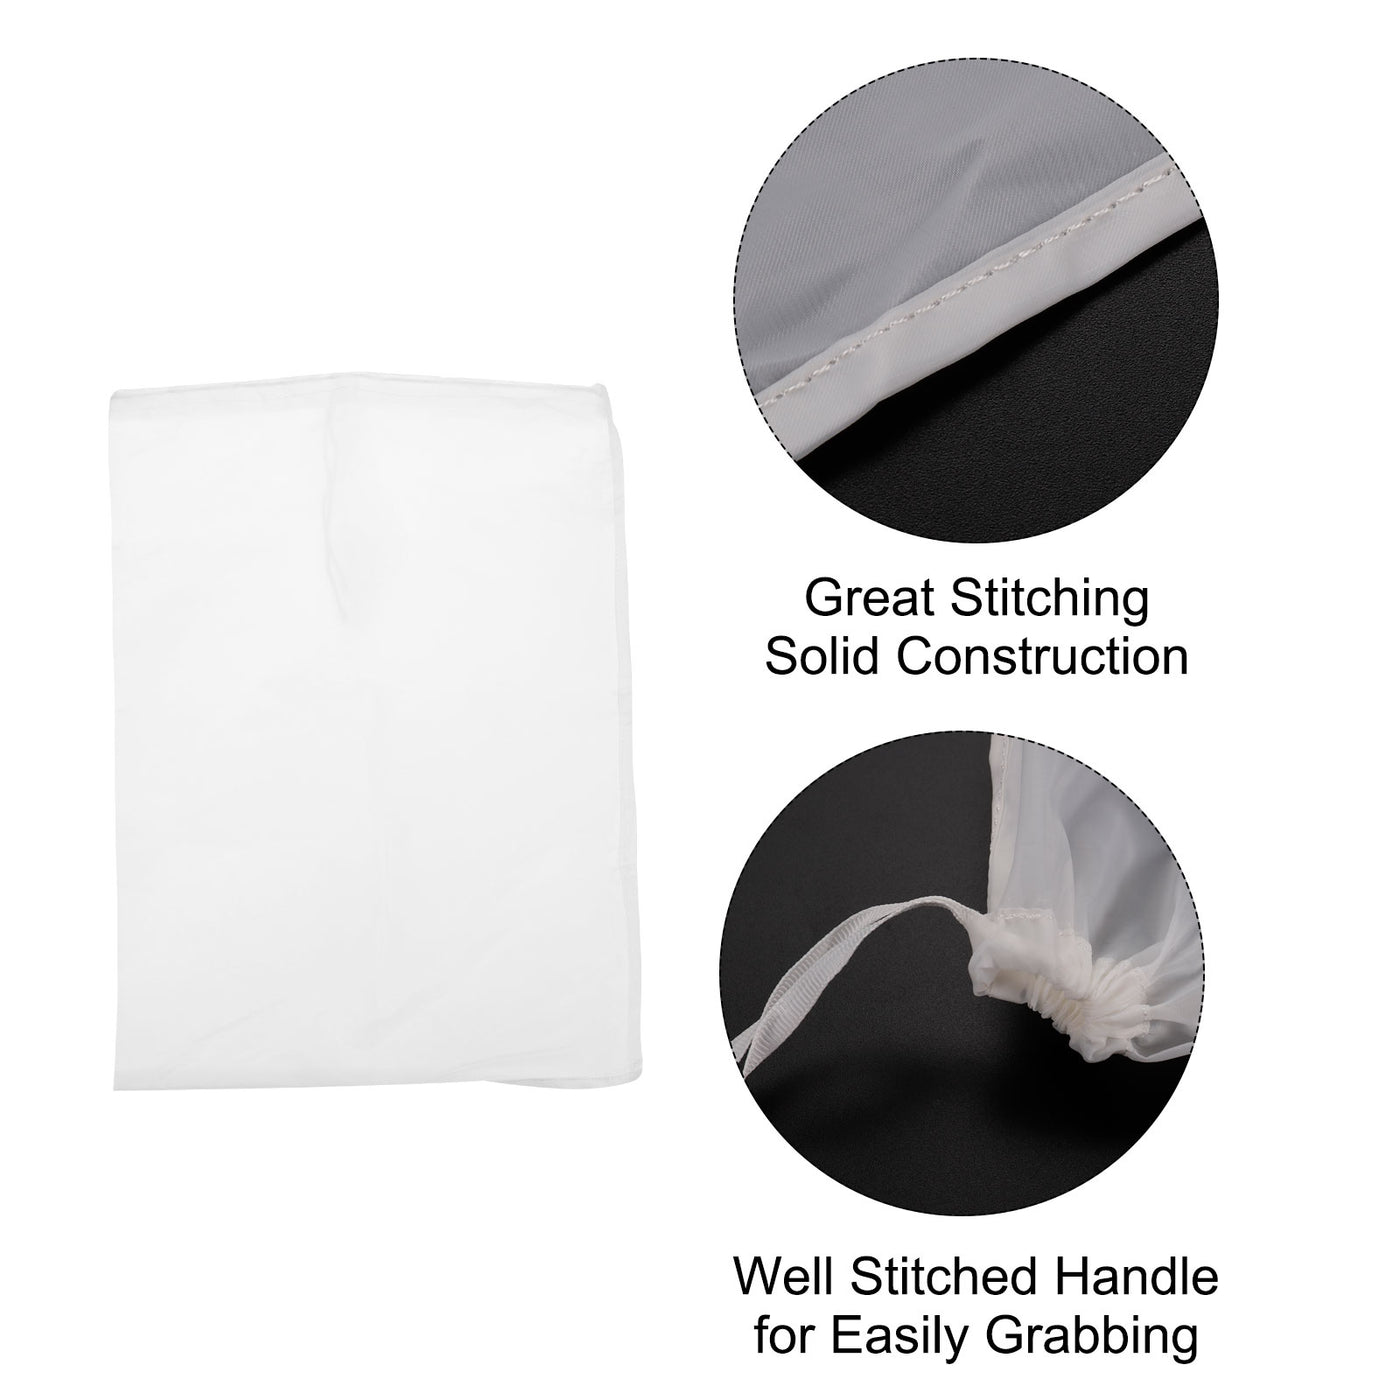 uxcell Uxcell Paint Filter Bag 300 Mesh (17.7"x11.8") Nylon Strainer for Filtering Paint